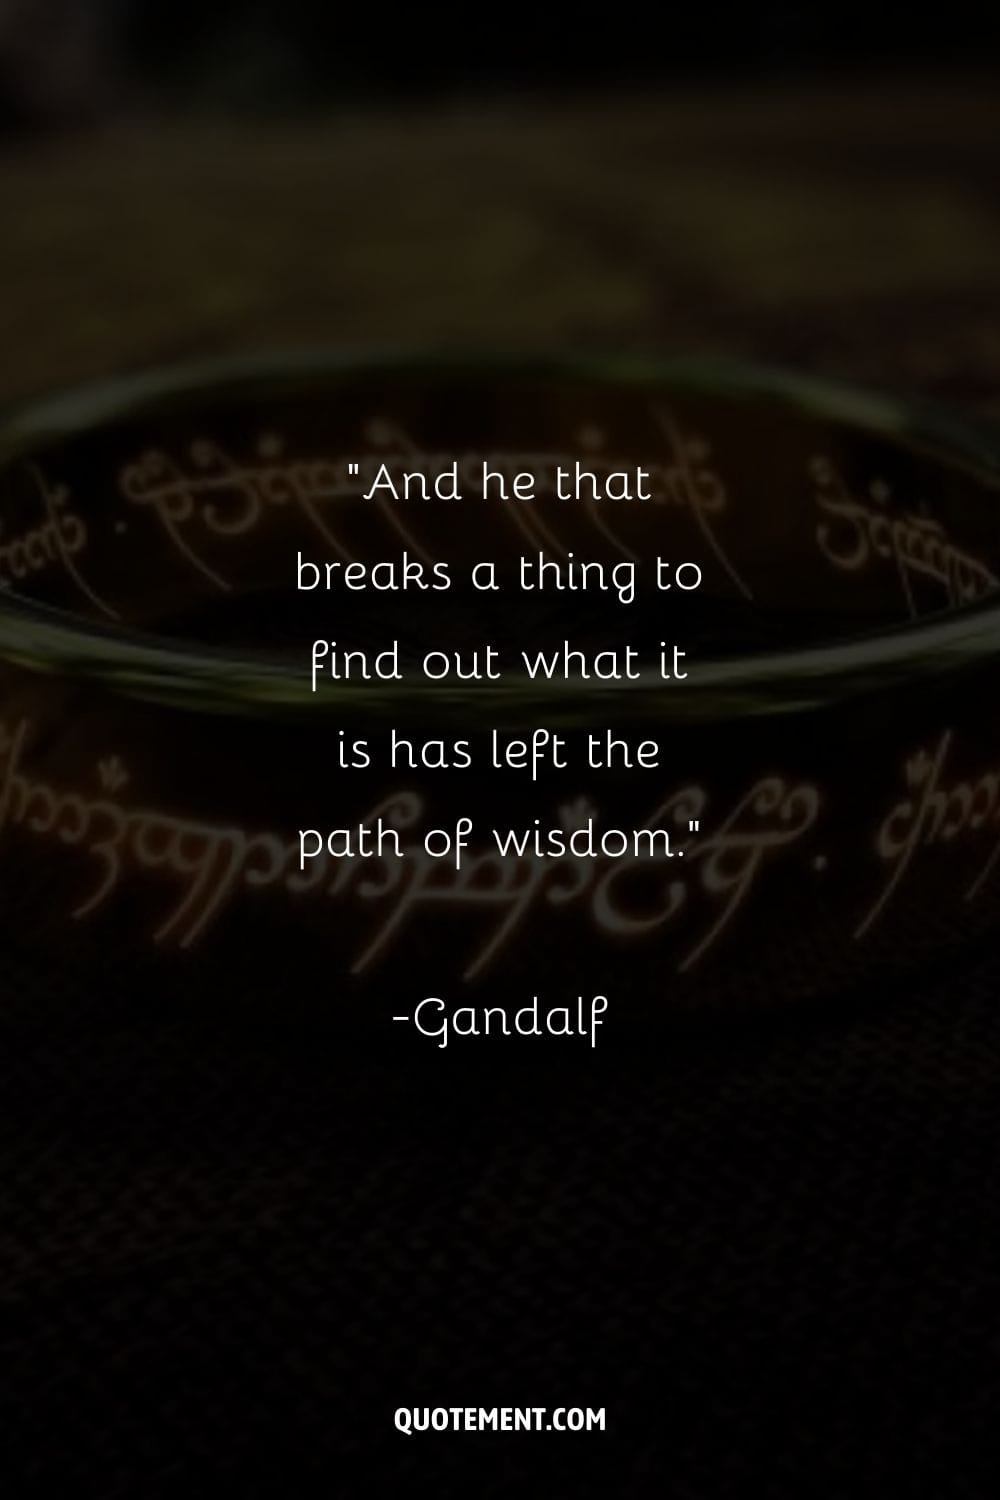 And he that breaks a thing to find out what it is has left the path of wisdom.